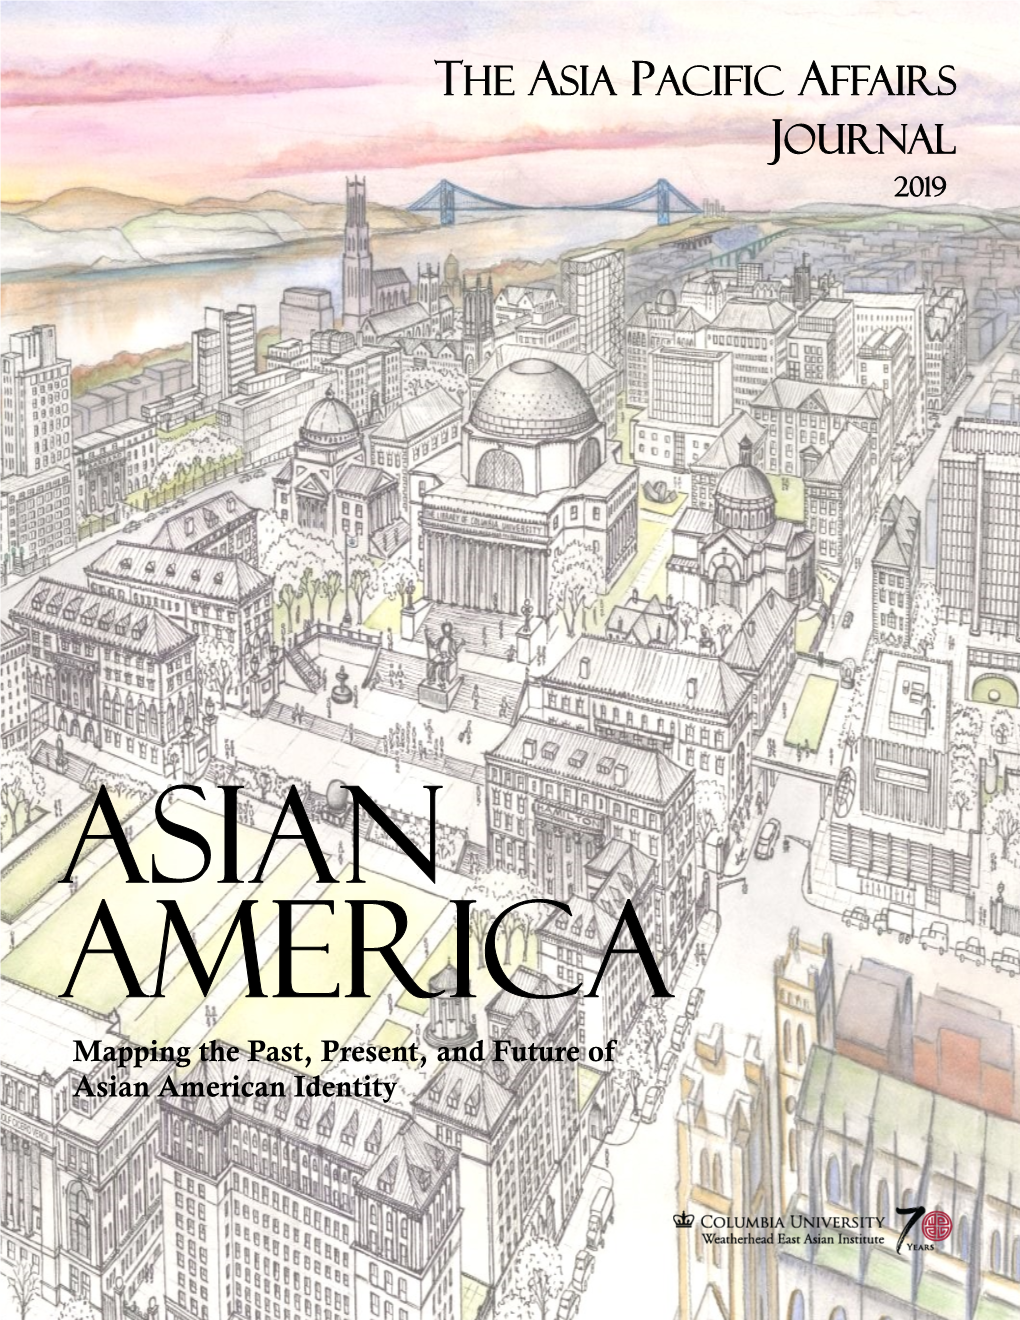 The Asia Pacific Affairs Journal 2019